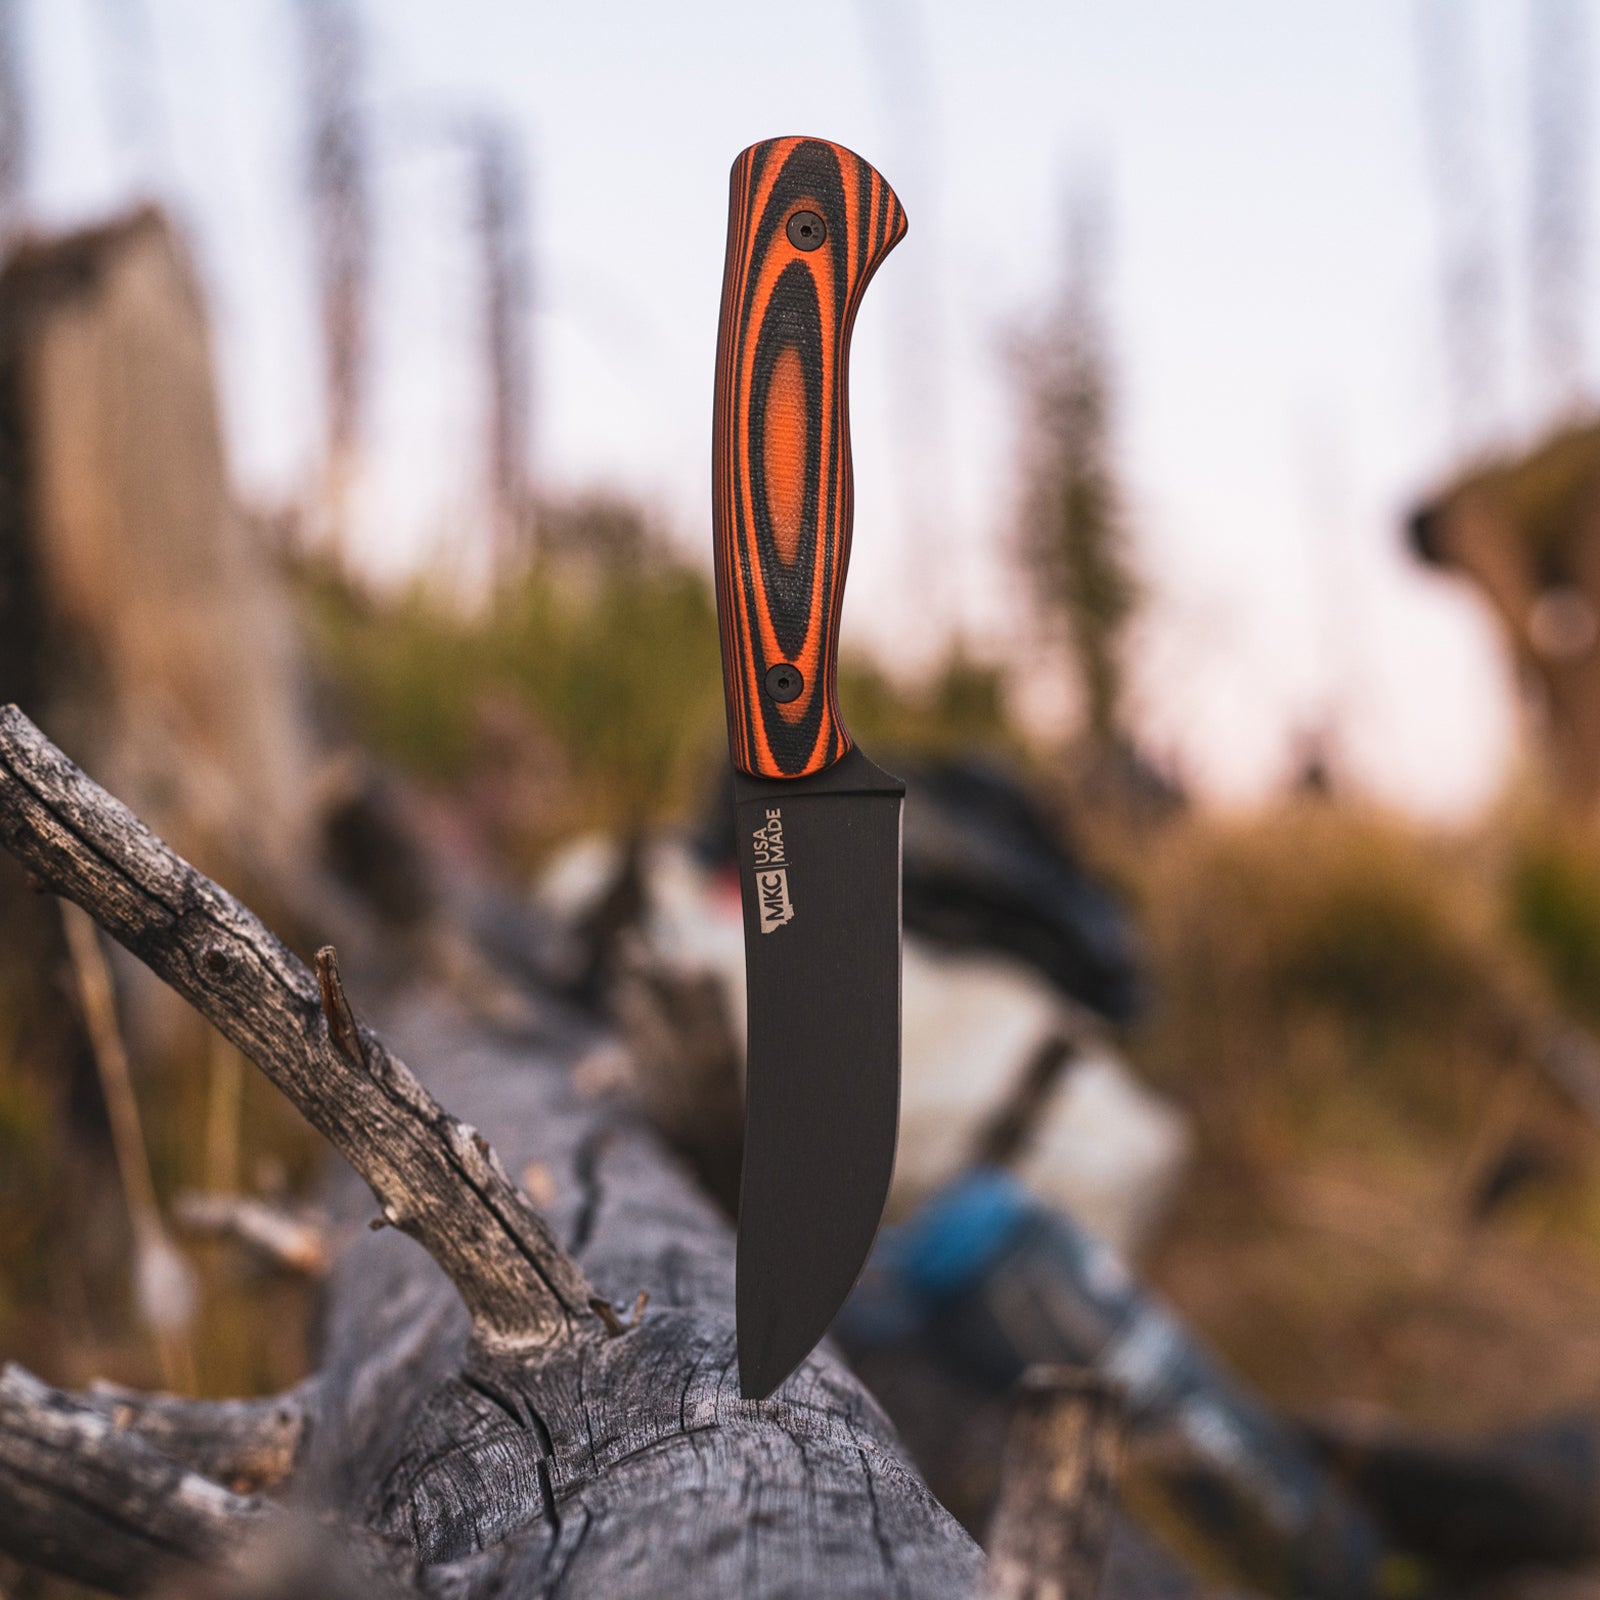 Montana Knife Company: The Truth About This American-Made Br - Petersen's  Hunting